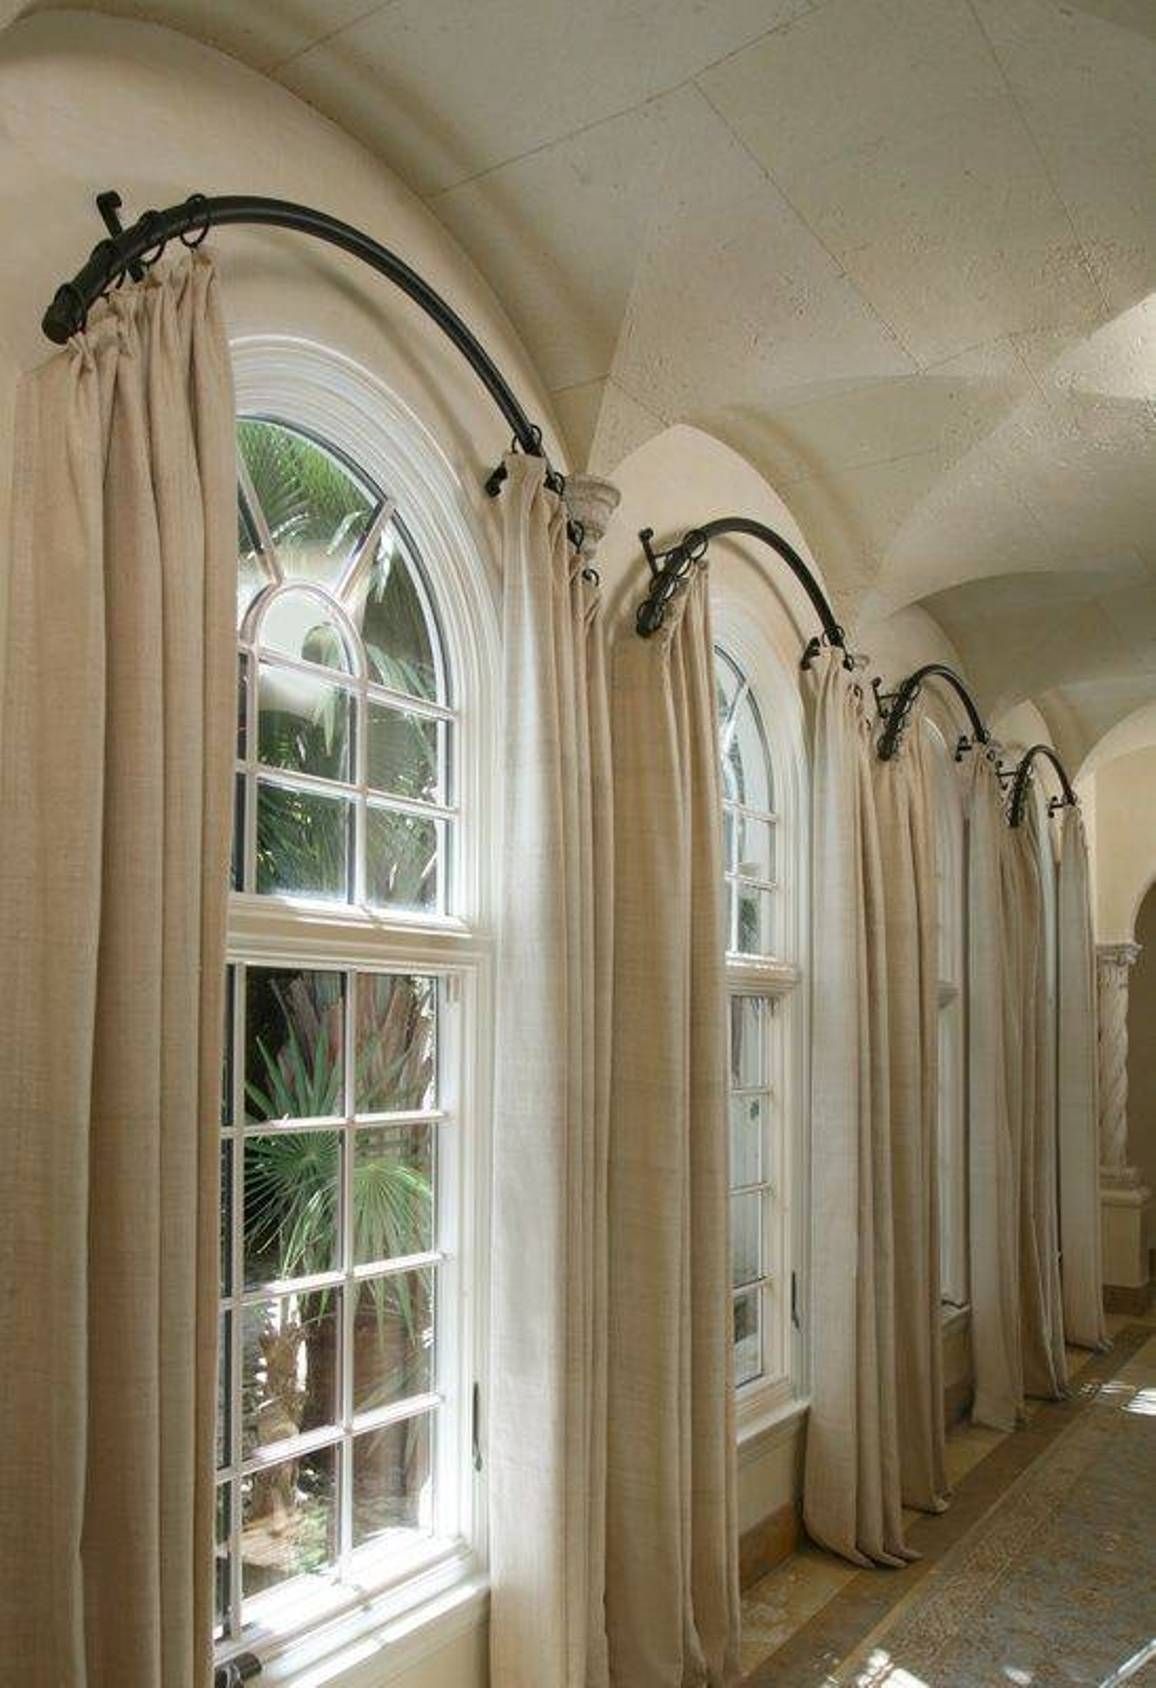 Beyond Windows: Unique And Unconventional Uses For Curtains